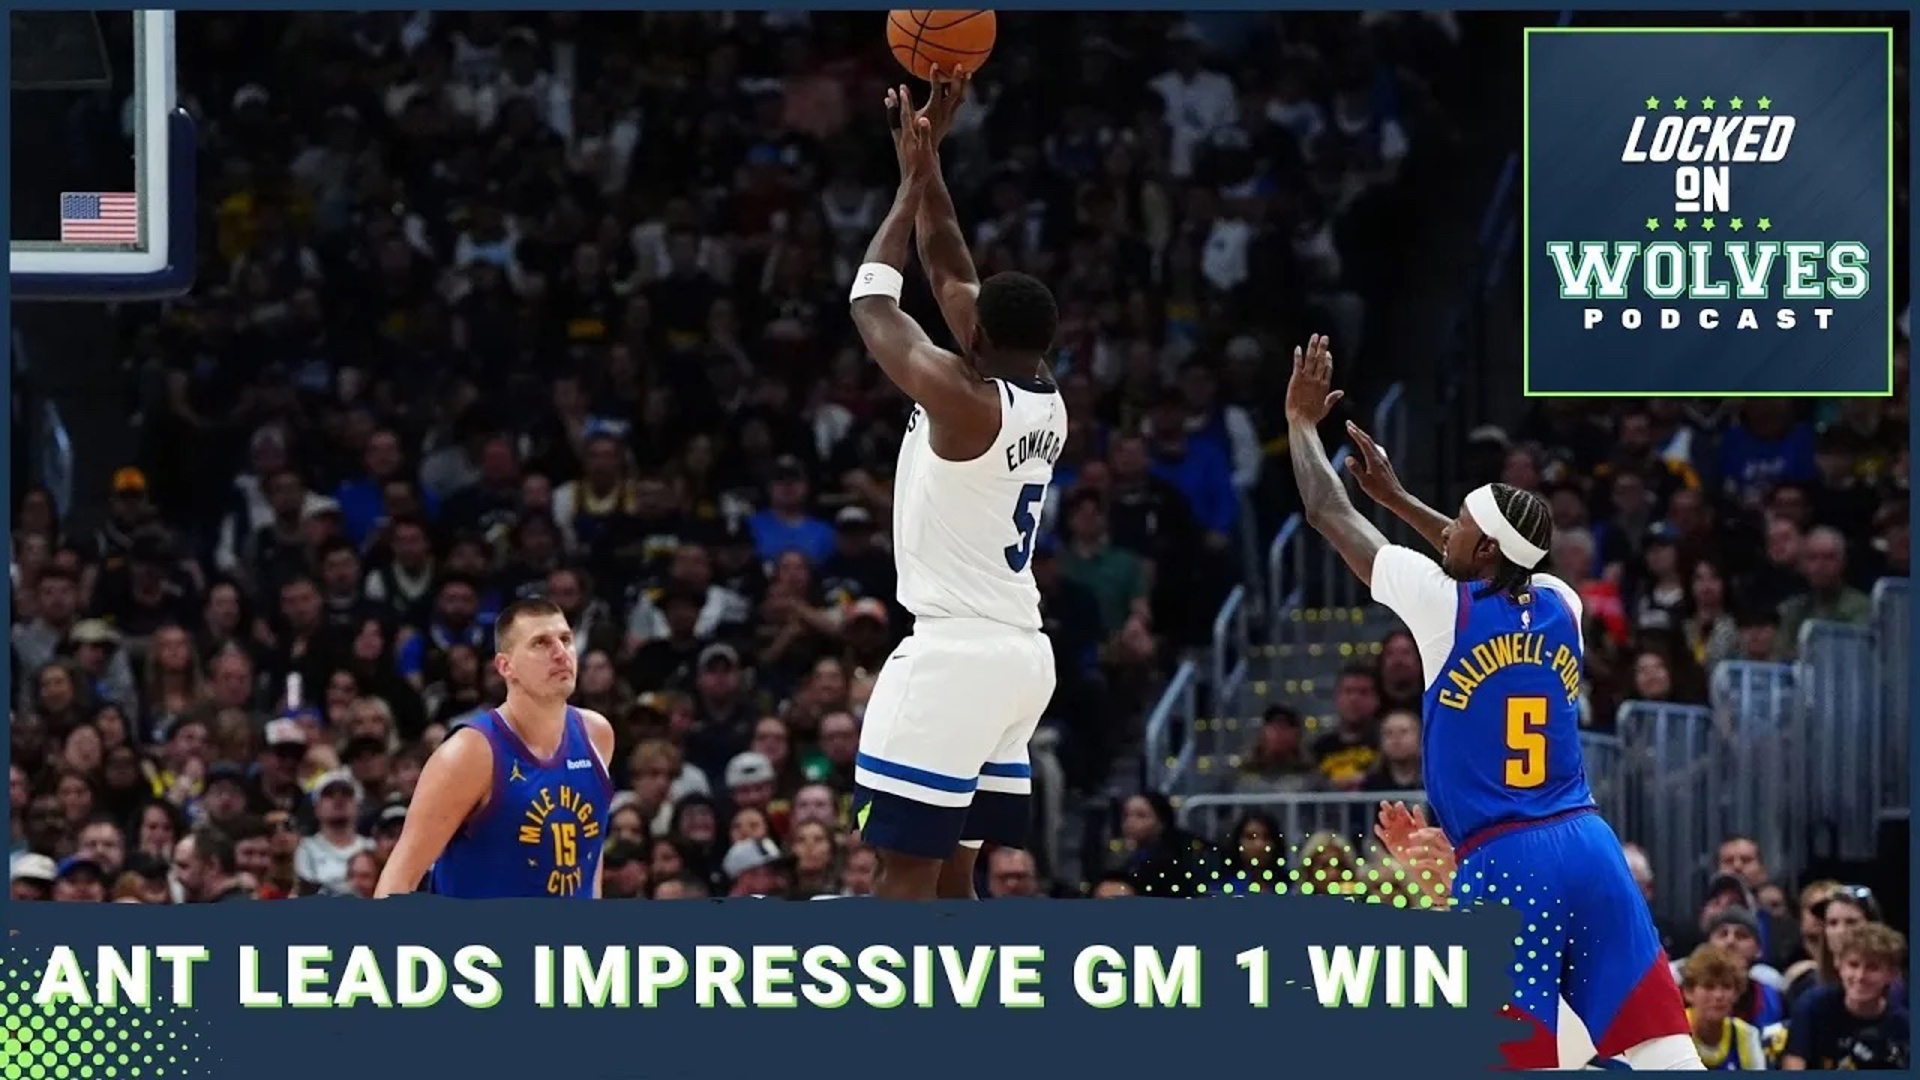 The Minnesota Timberwolves put together an impressive performance in their Game 1 win over the Denver Nuggets. What stuck out, and what might change in Game 2?